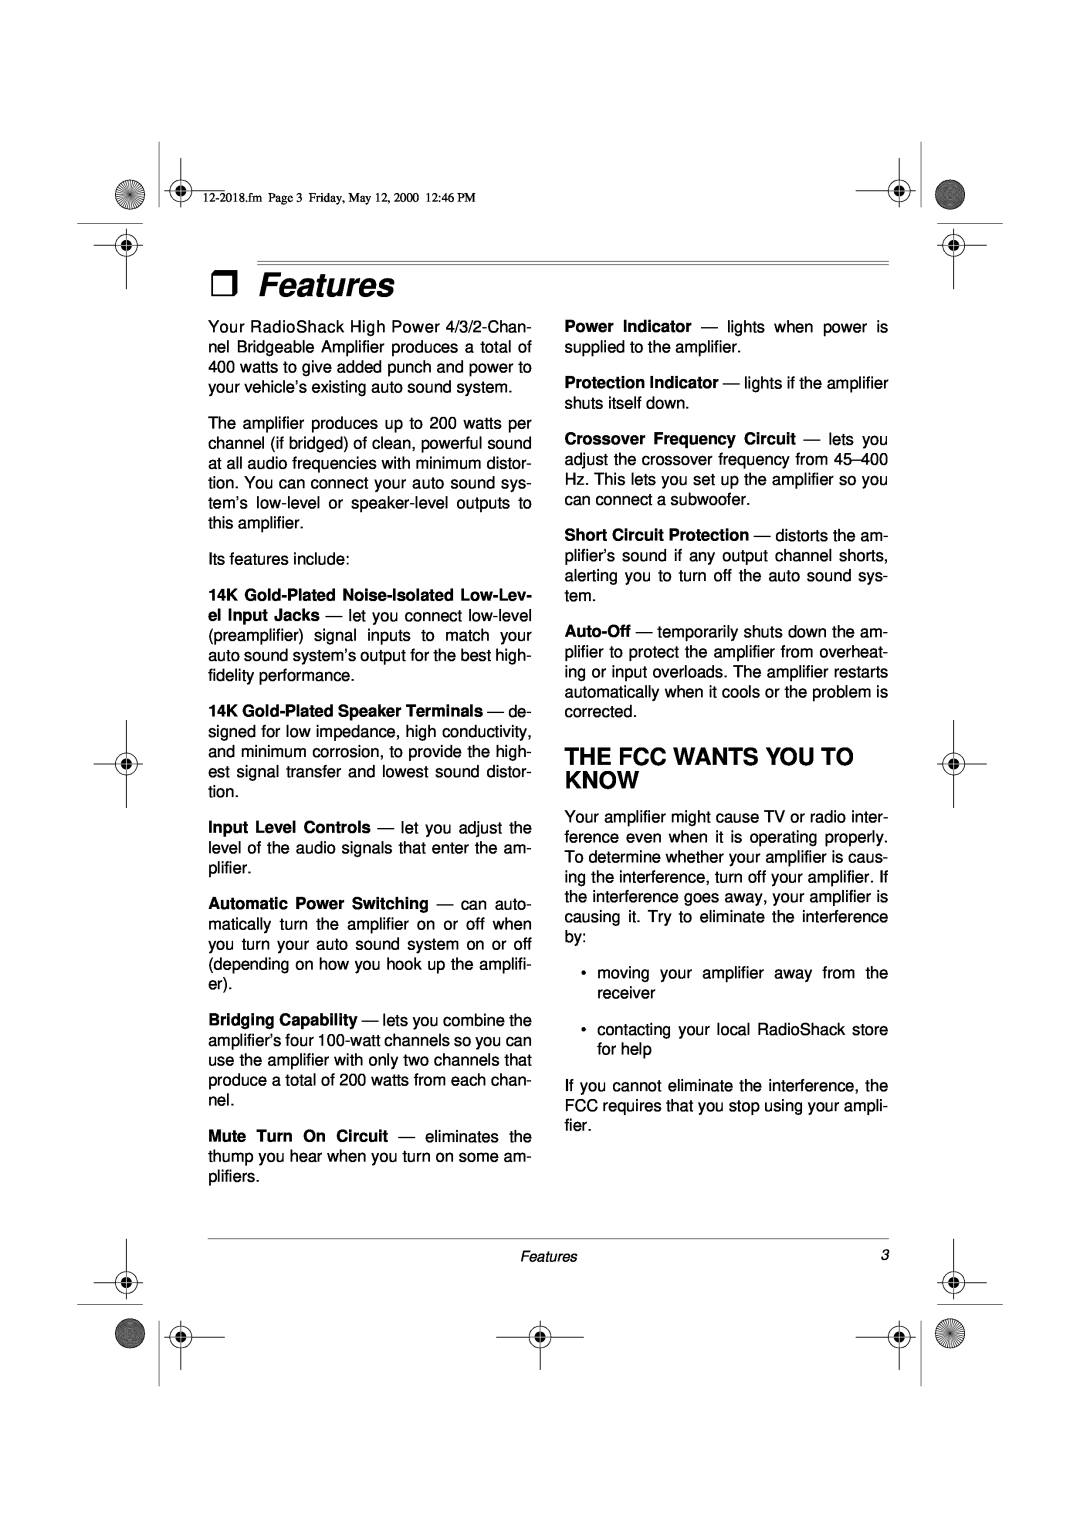 Radio Shack XL-400 owner manual ˆFeatures, The Fcc Wants You To Know 